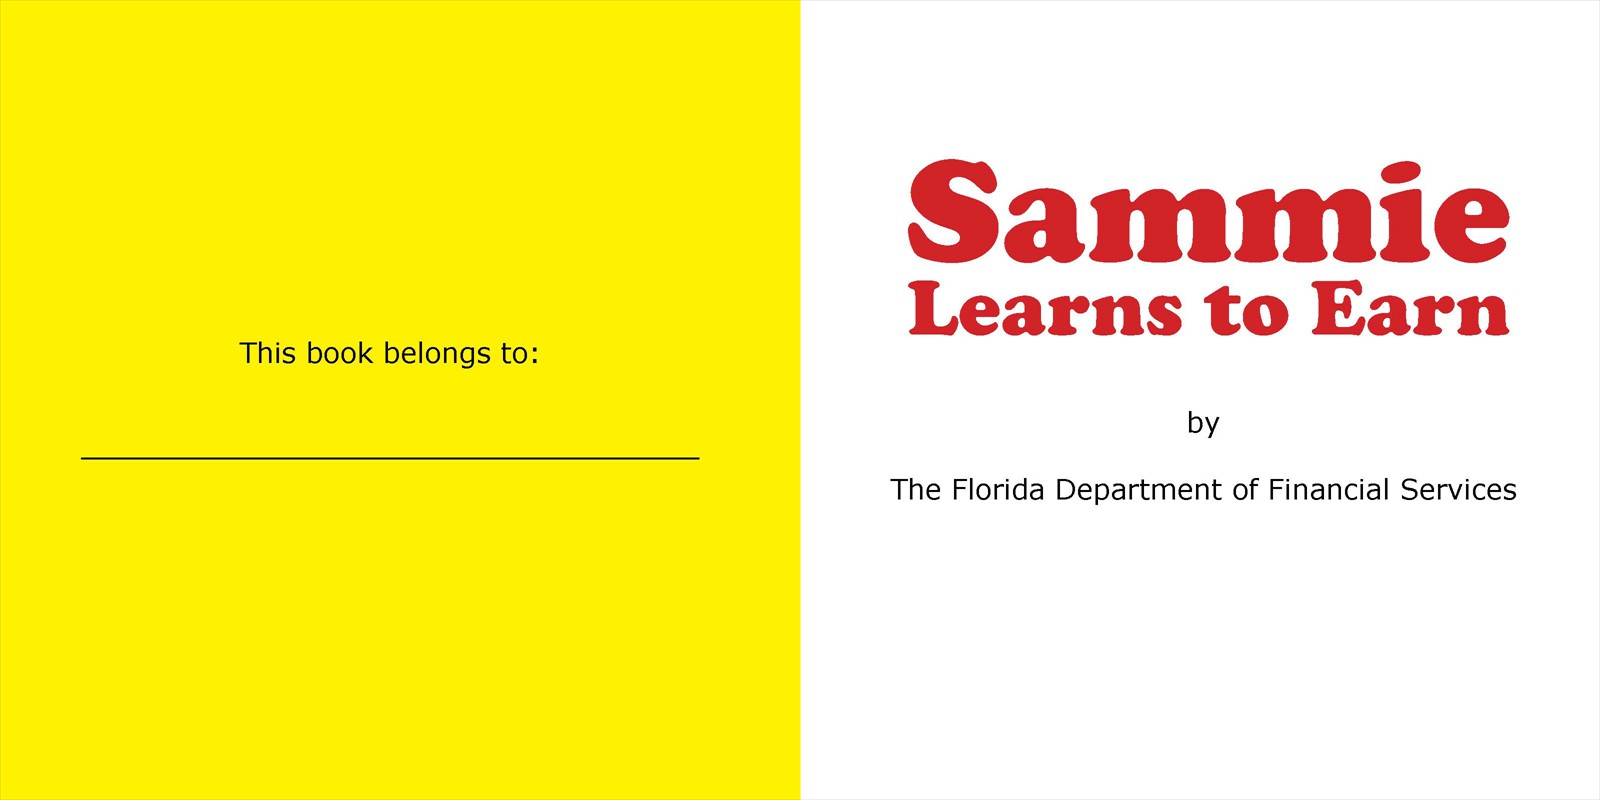 Slide 02 of the Sammie Learns to Earn Book